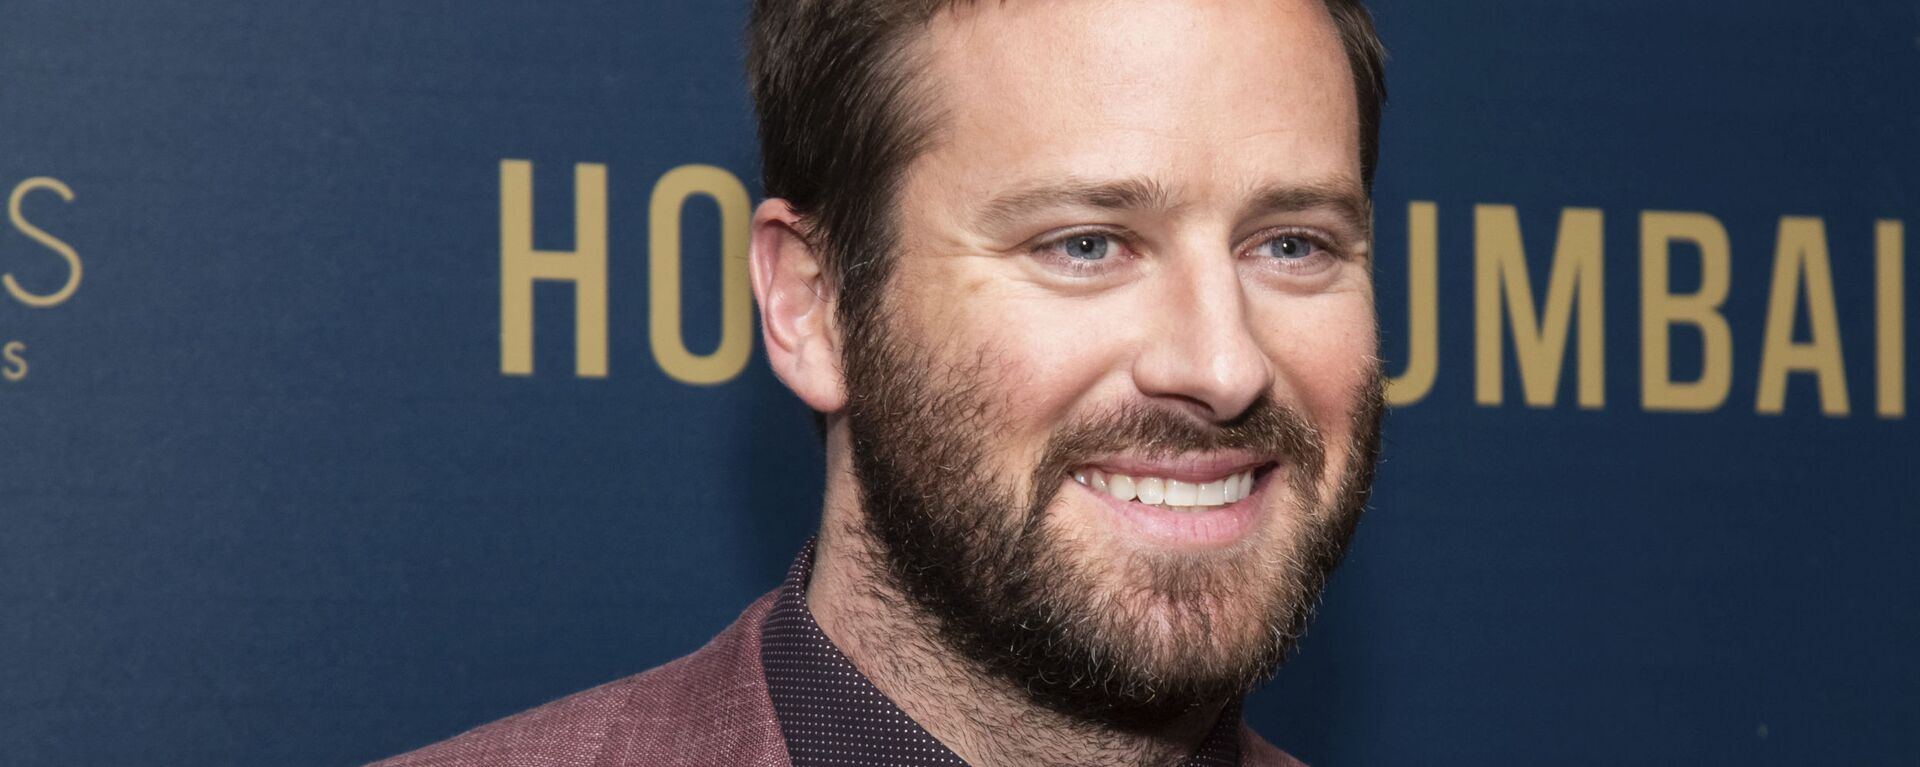 Armie Hammer attends a screening of Hotel Mumbai hosted by Bleecker Street and ShivHans Pictures at the Museum of Modern Art on Sunday, March 17, 2019, in New York - Sputnik International, 1920, 06.02.2021